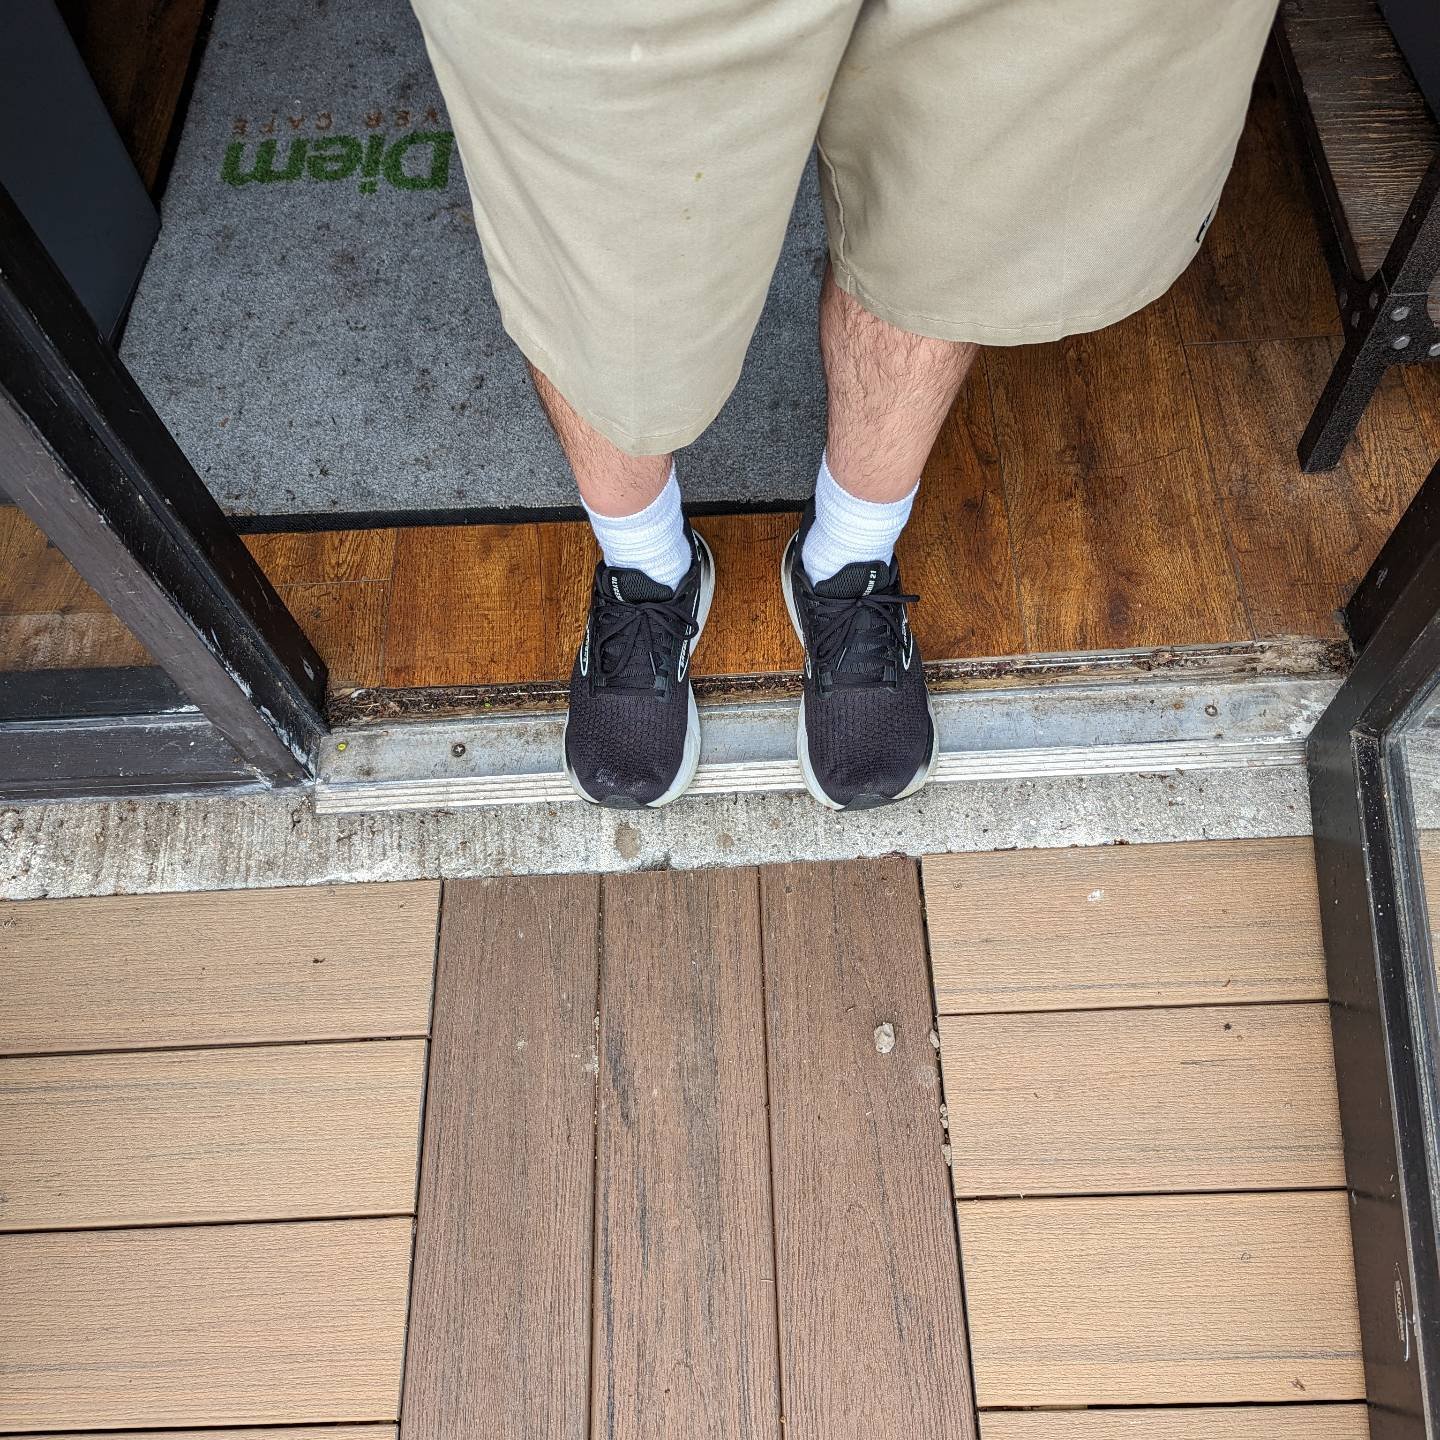 In case you didn't notice the step out to our new deck (by the way, our deck is new and it's open), well there is no step. You just open the door and bam 💥 deck ☀️